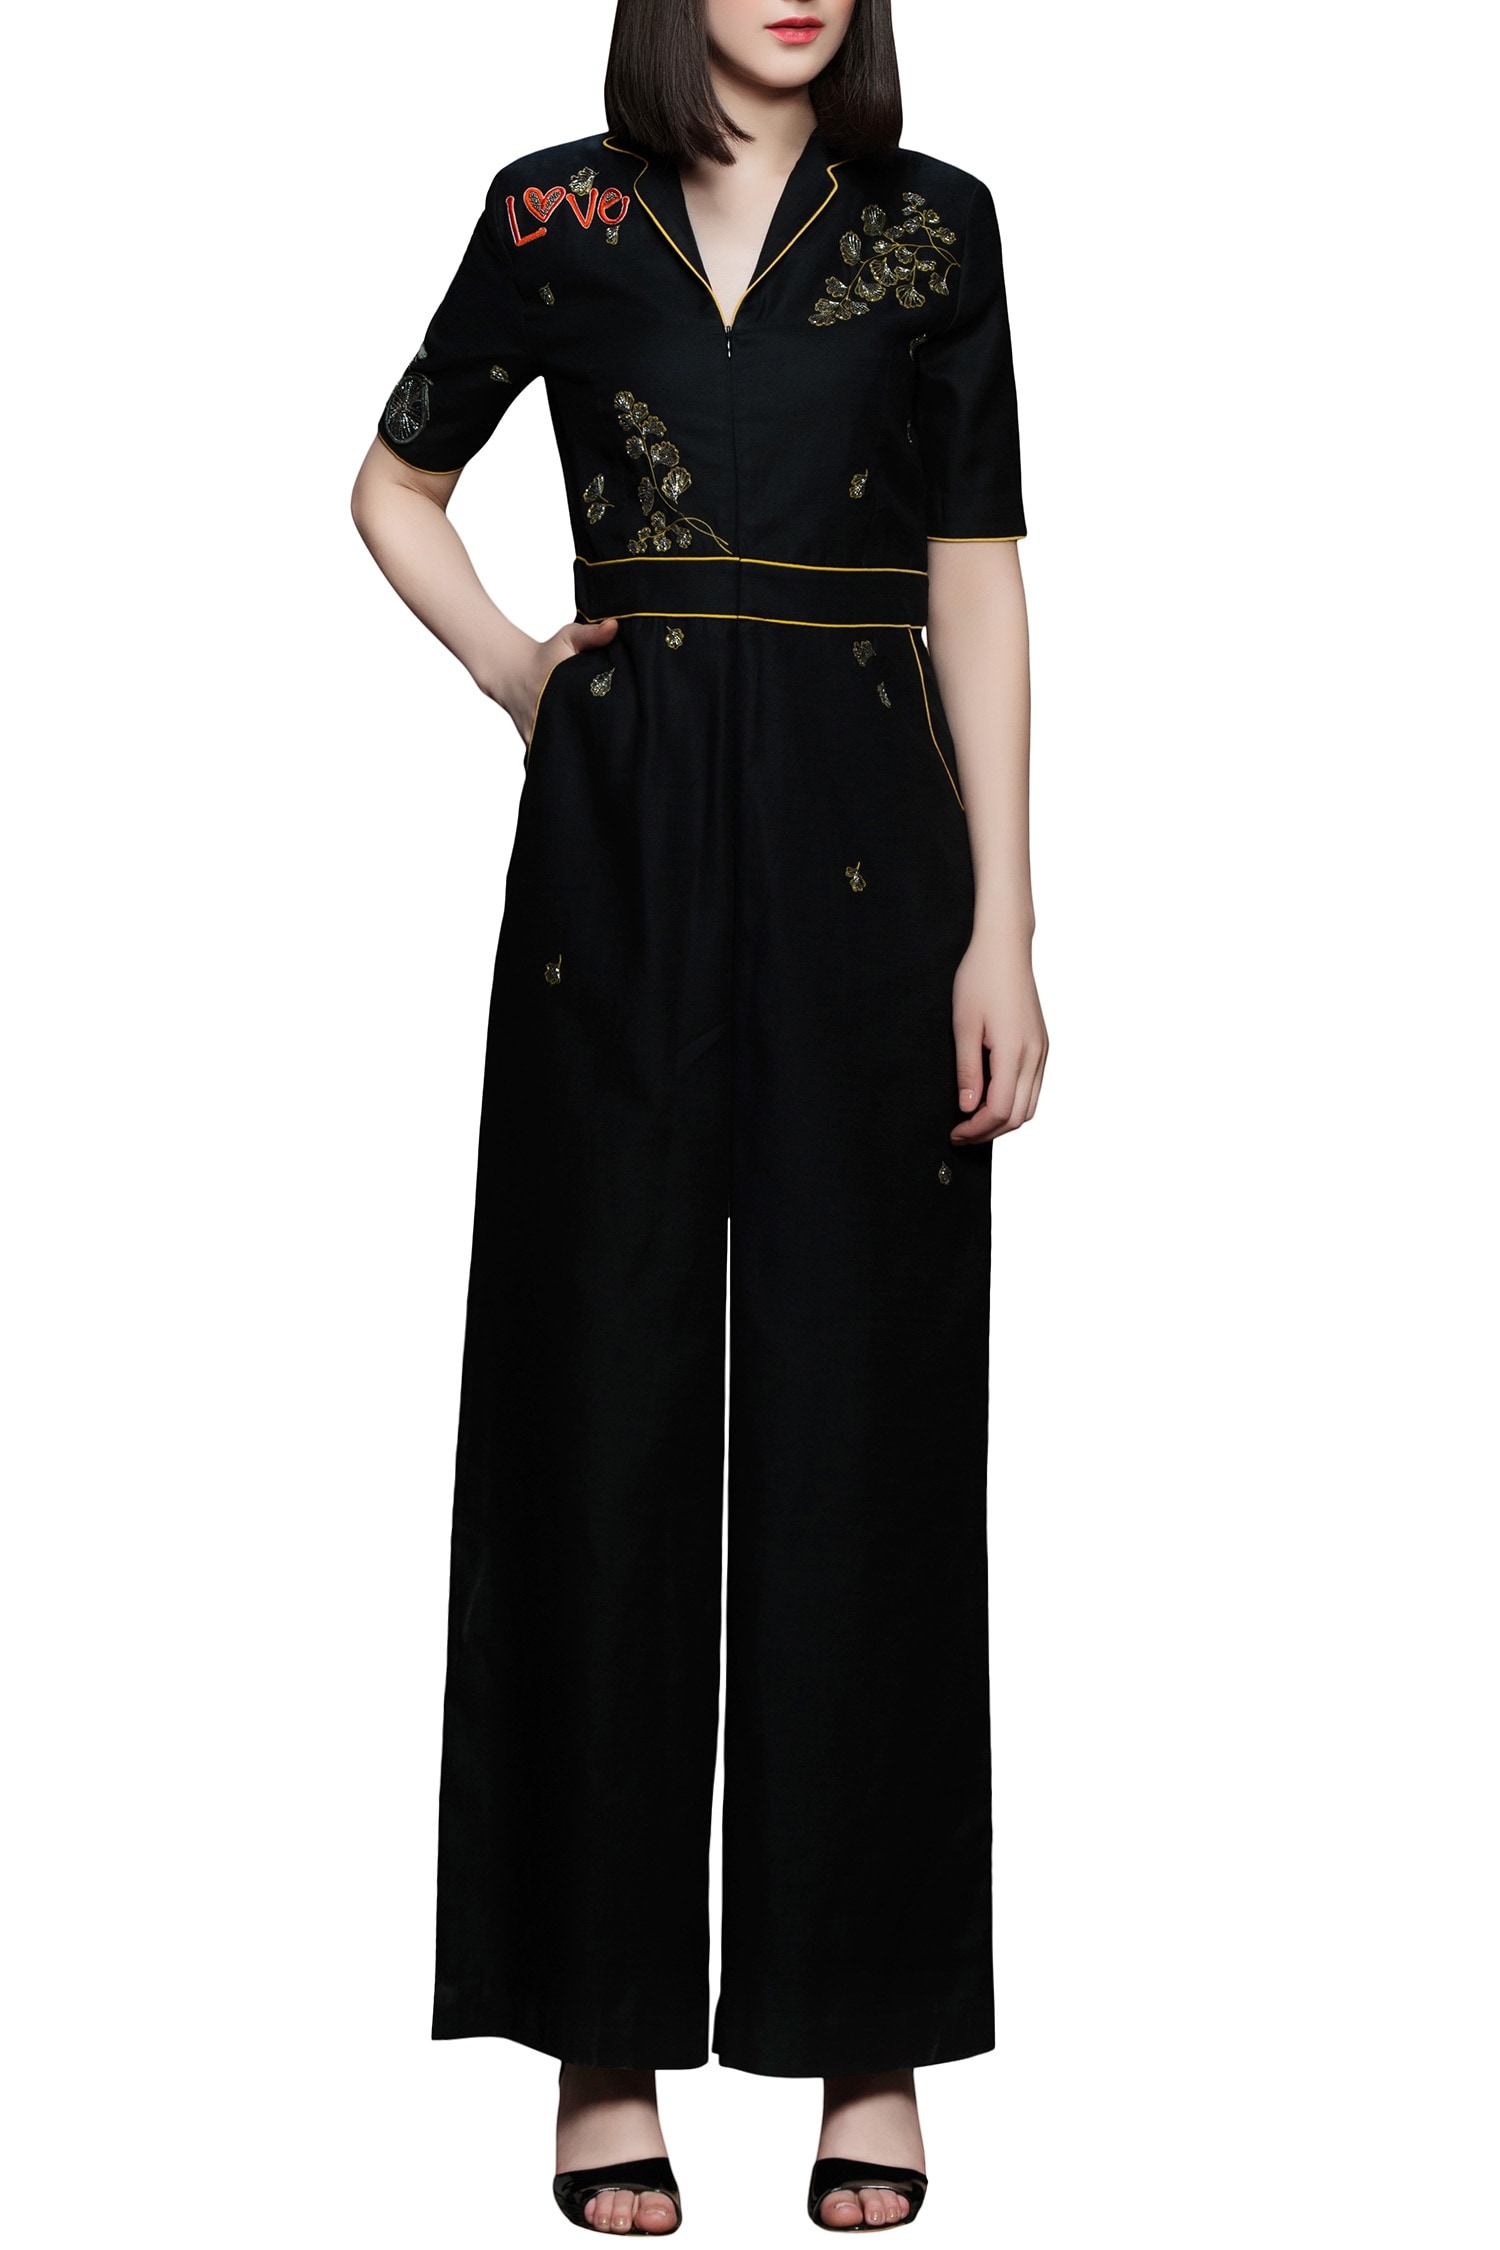 Shahin Mannan Black Embroidered Jumpsuit For Women